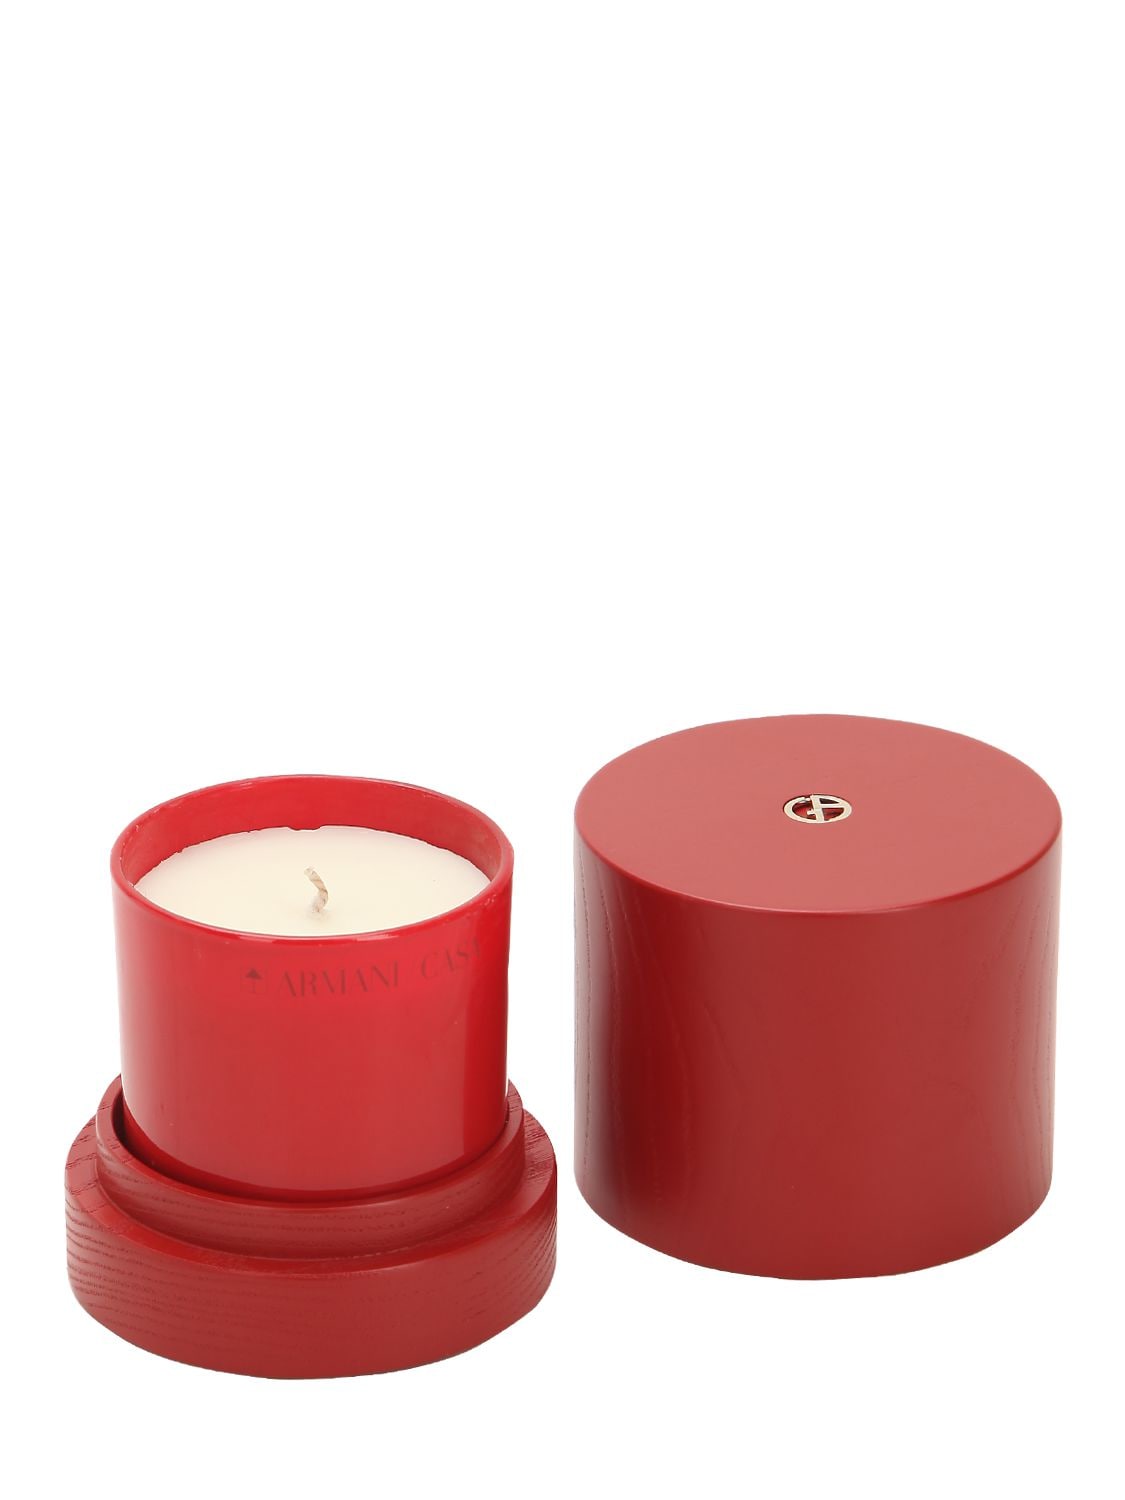 Armani/casa Hola Scented Christmas Candle In Red